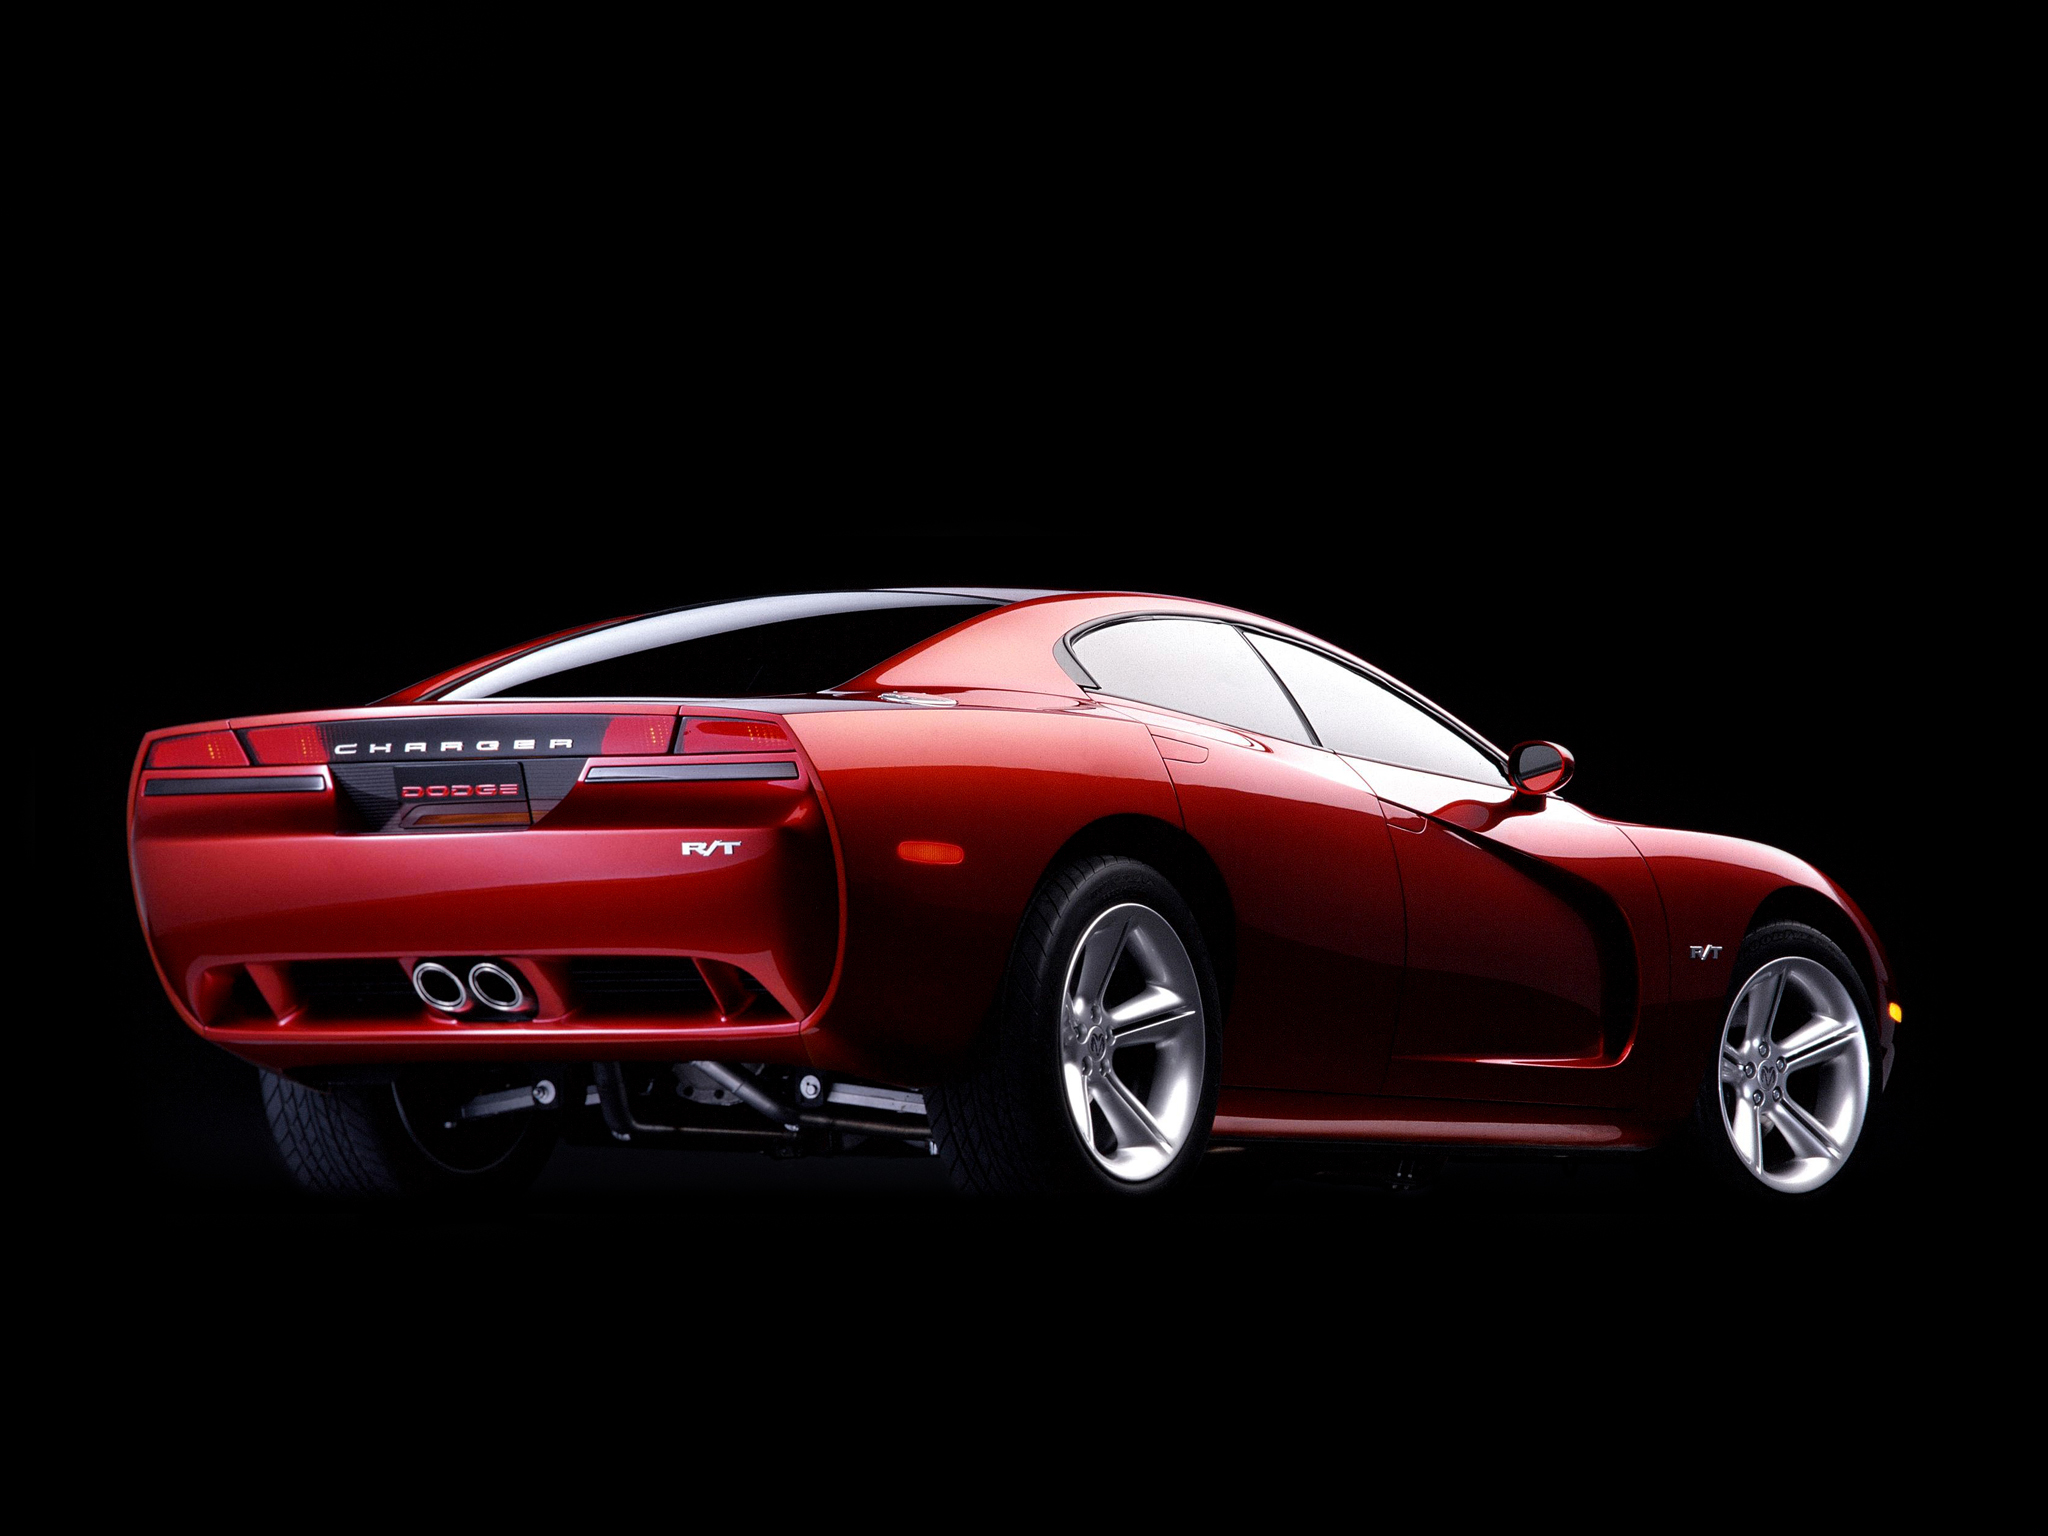 1999, Dodge, Charger, R t, Concept, Muscle, Supercar Wallpaper